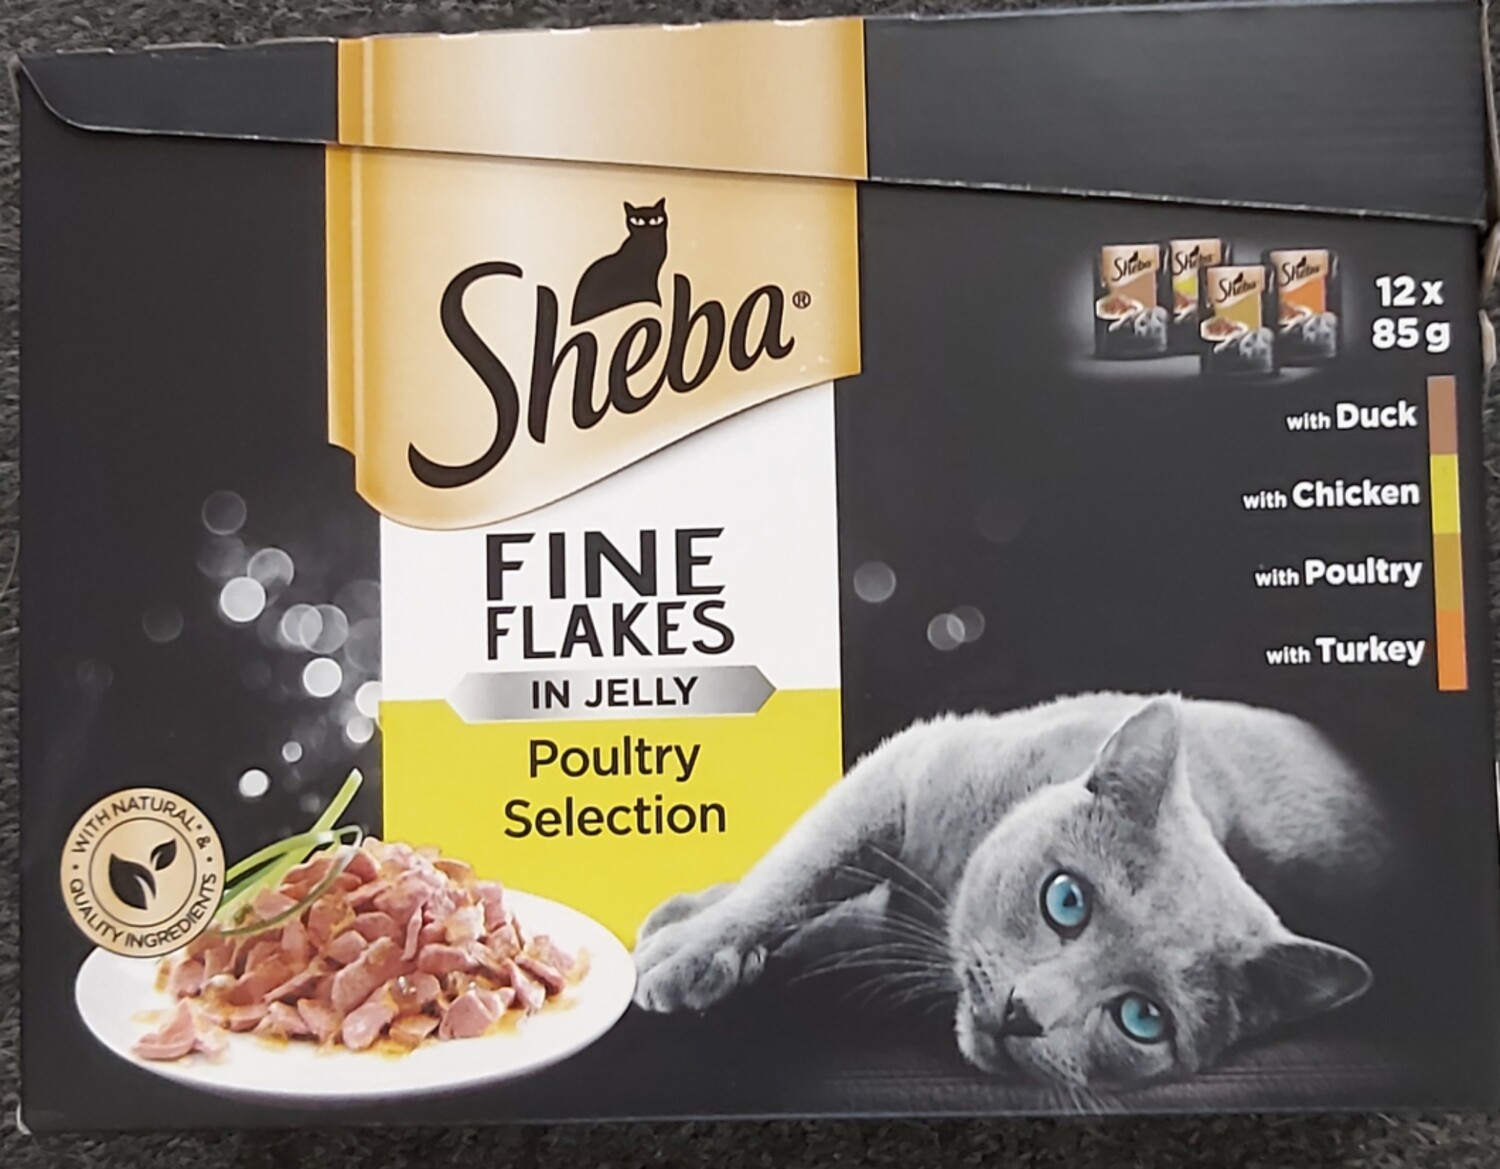 Sheba Fine Flakes Poultry in Jelly 12 x 85g